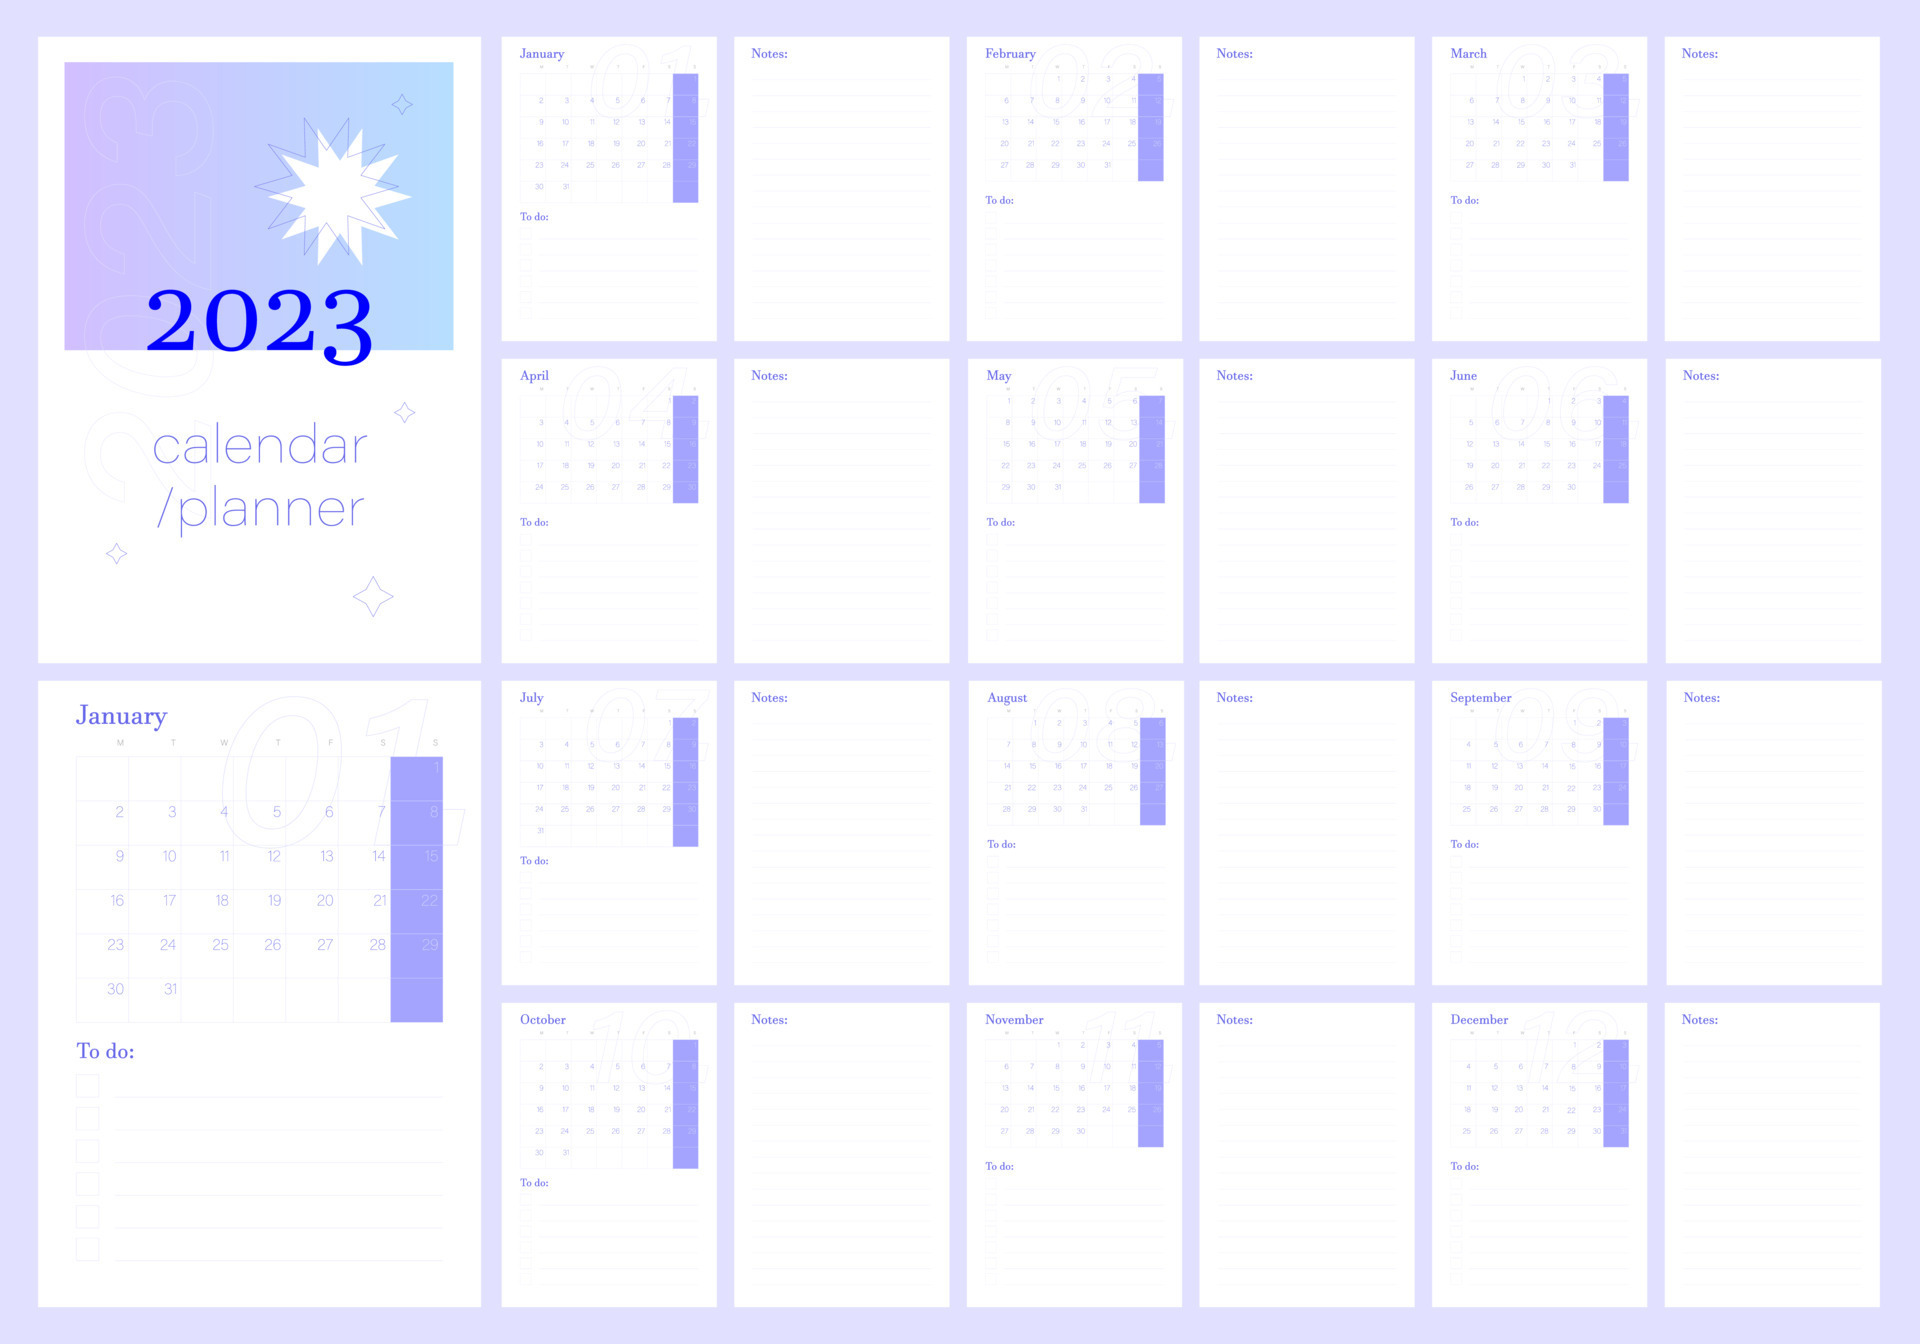 2023 calendar planner. Daily, weekly, monthly planner template